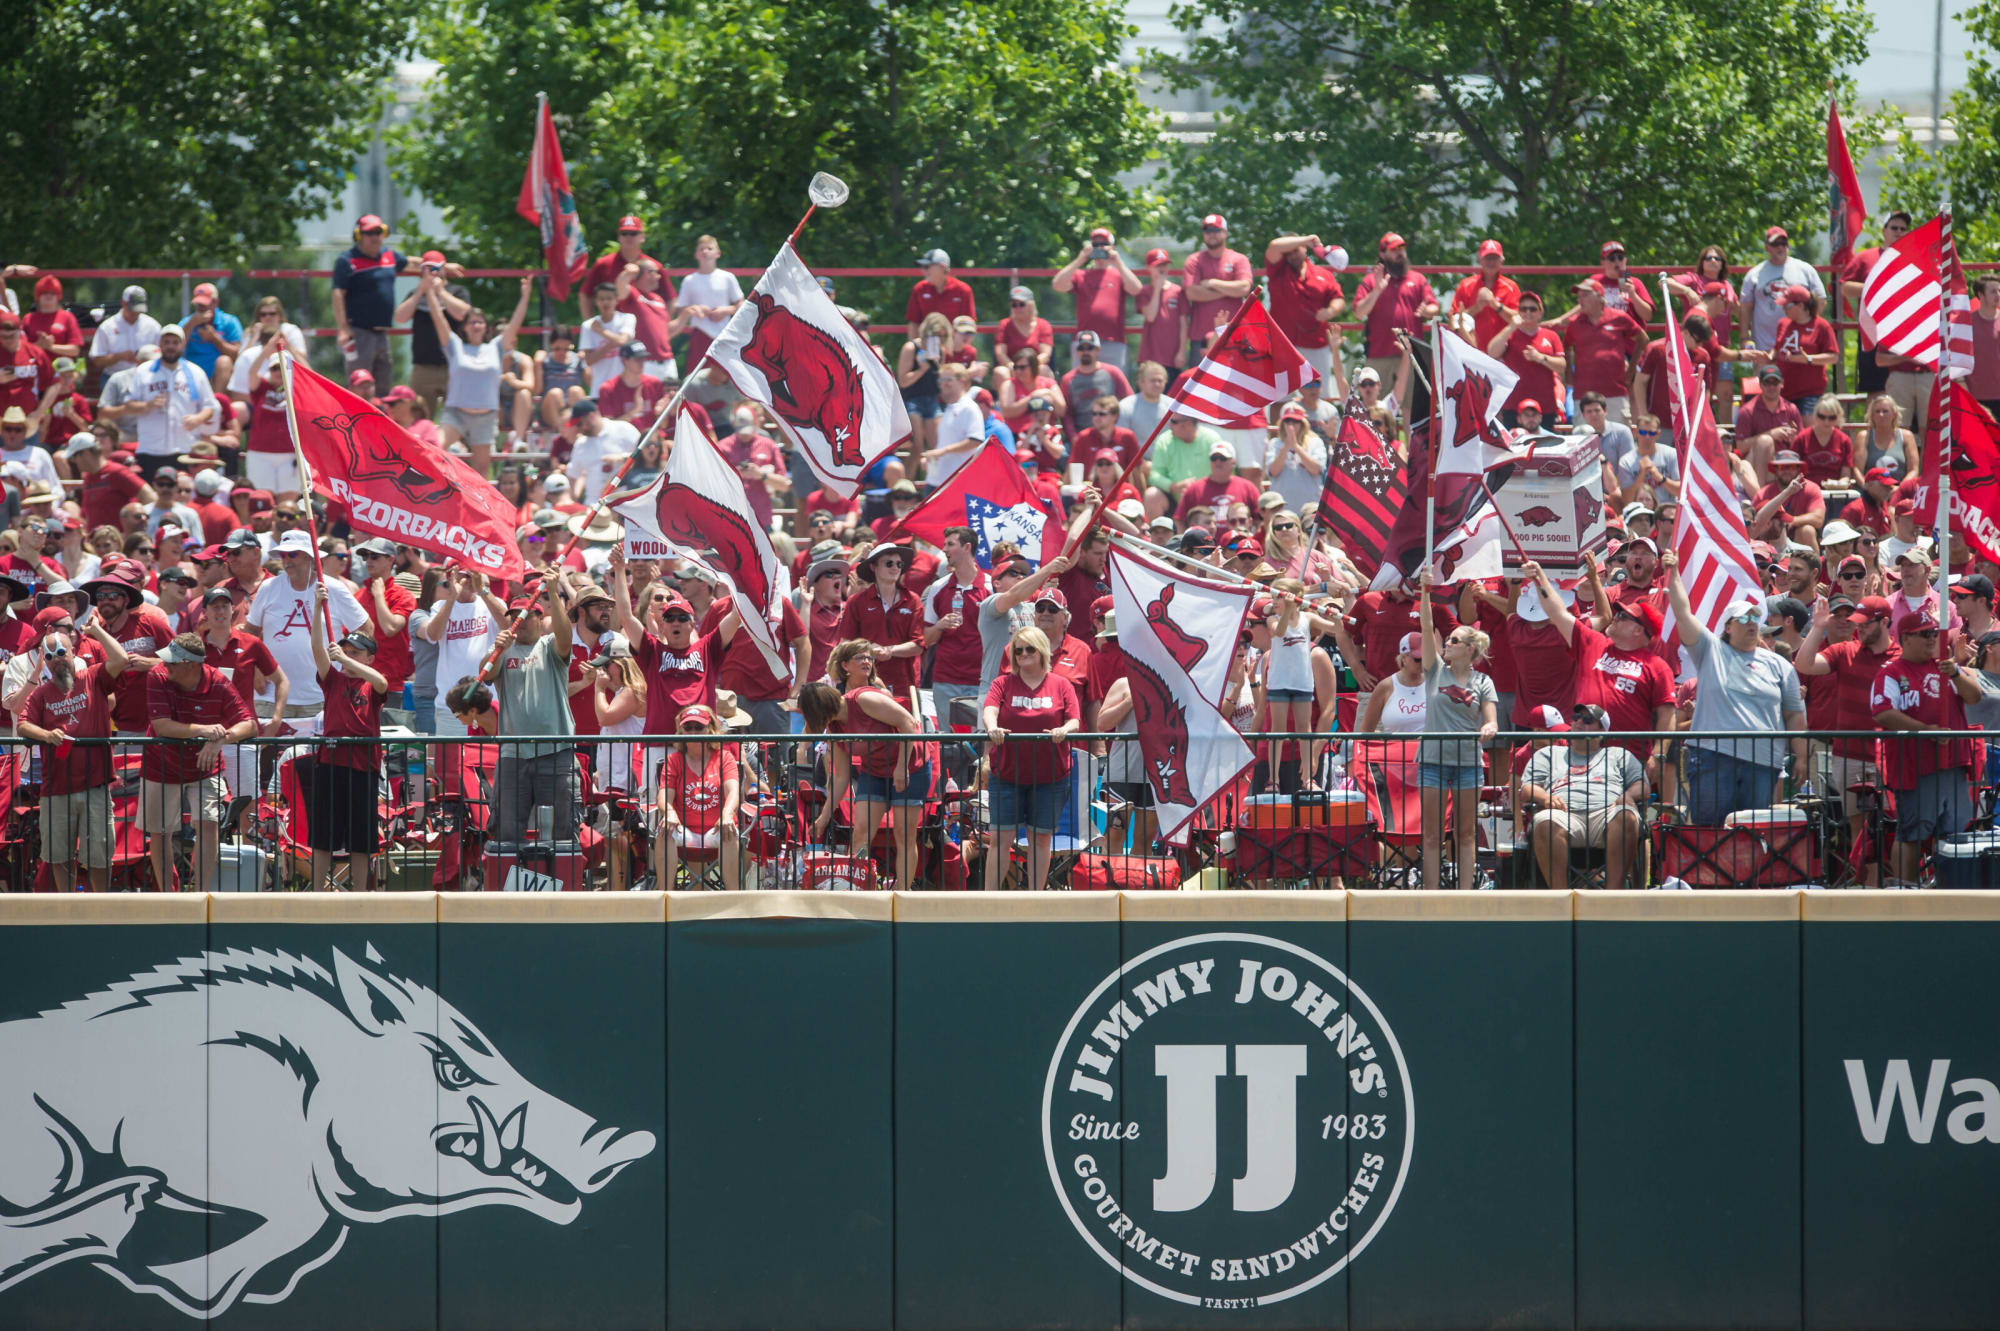 Look! An Arkansas baseball fan acts totally normal and has a raccoon on the stands thumbnail